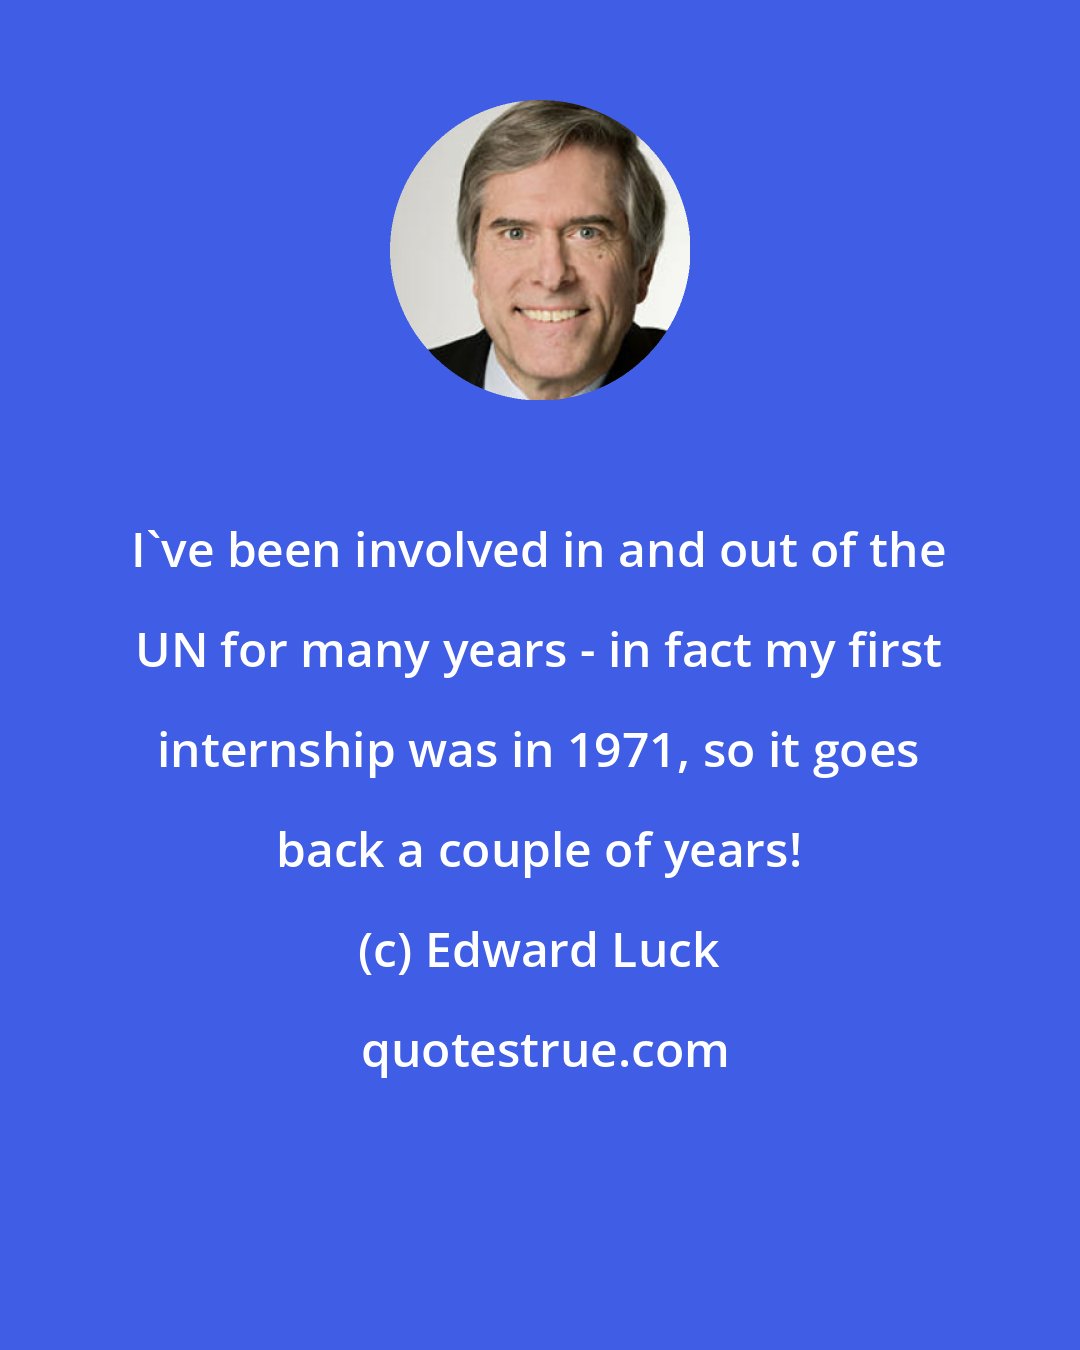 Edward Luck: I've been involved in and out of the UN for many years - in fact my first internship was in 1971, so it goes back a couple of years!